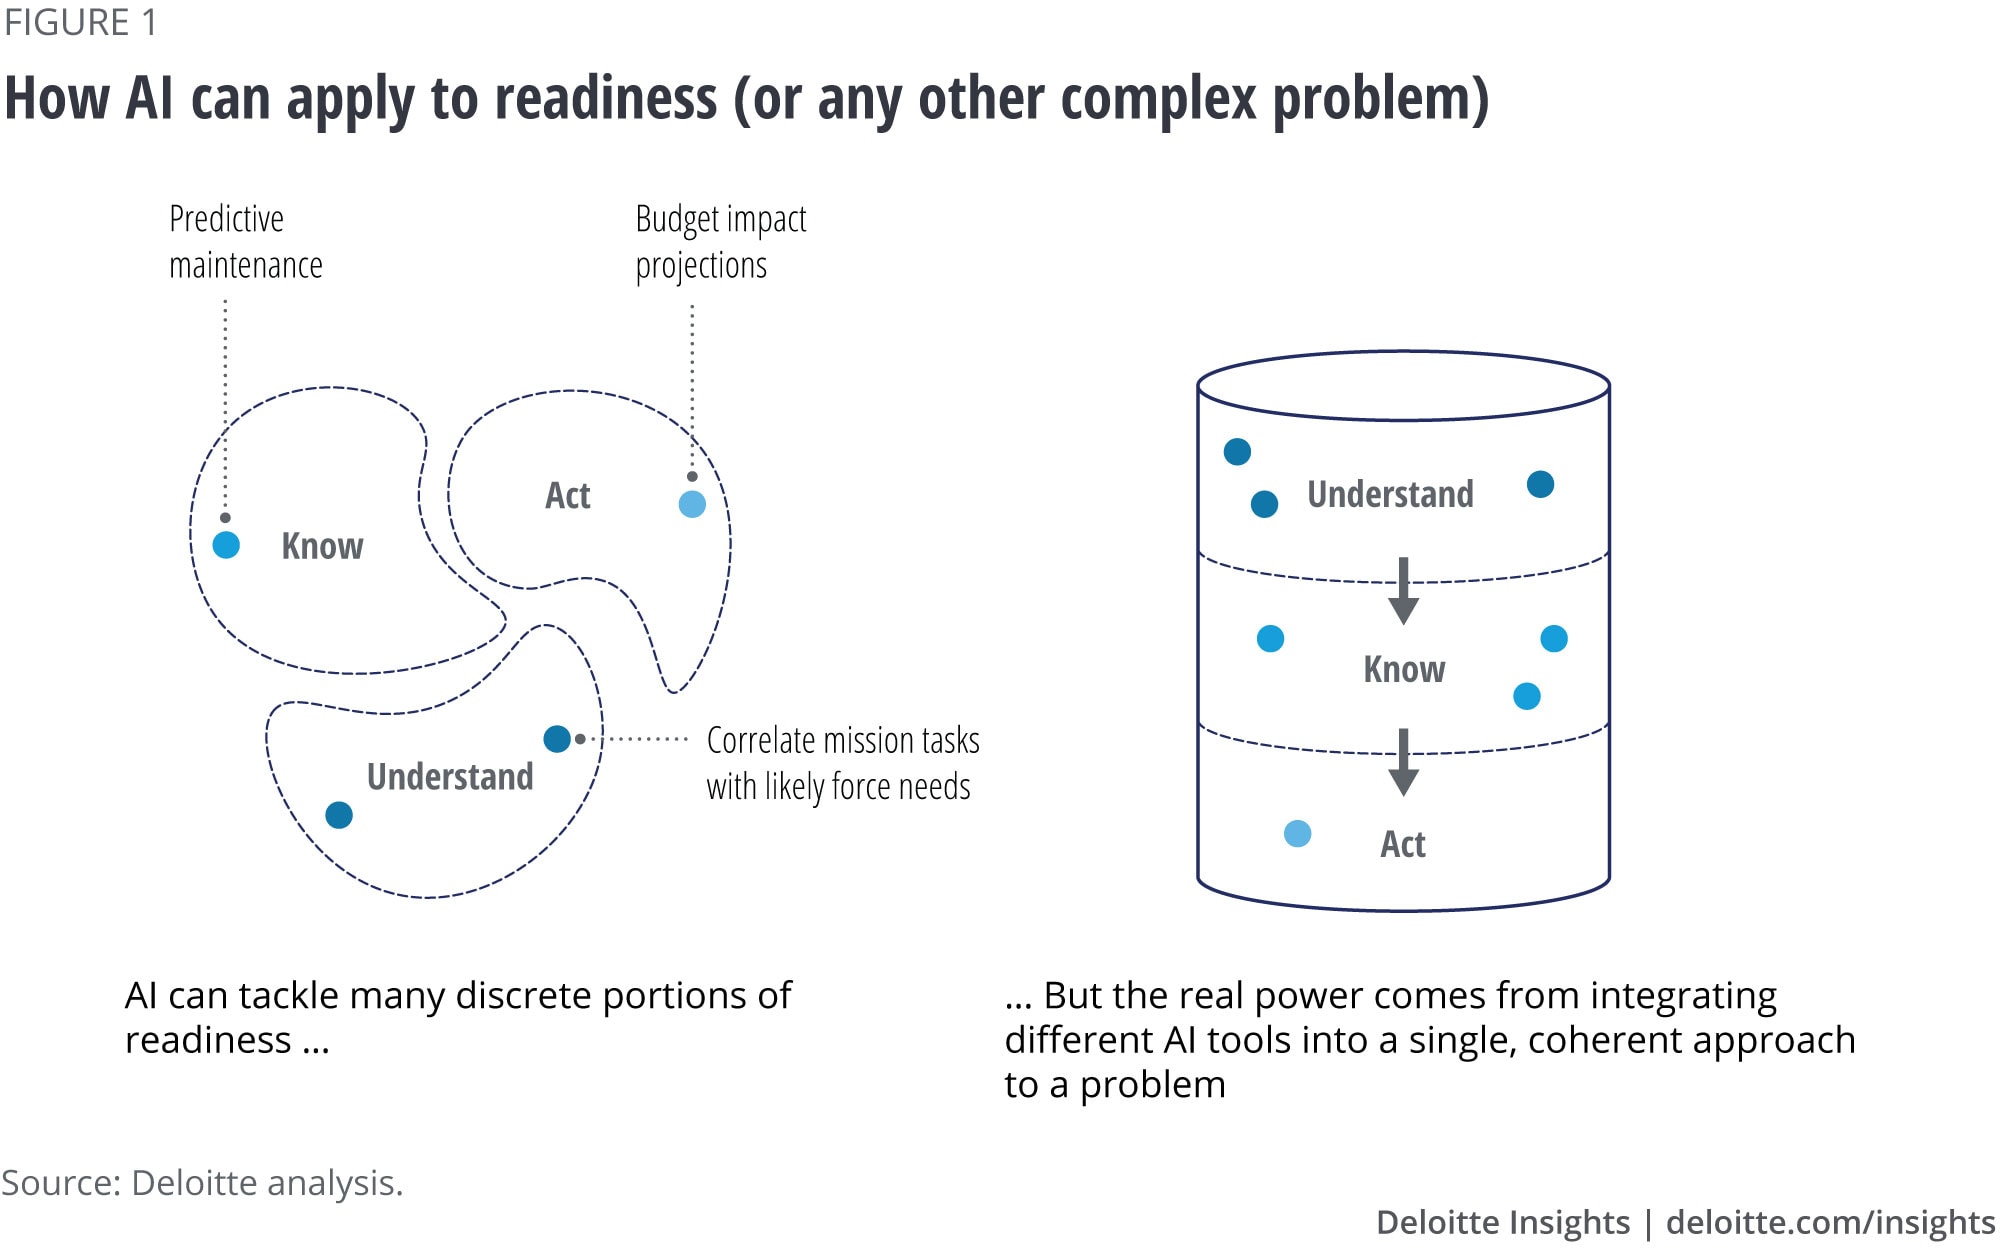 How AI can apply to readiness (or any other complex problem)